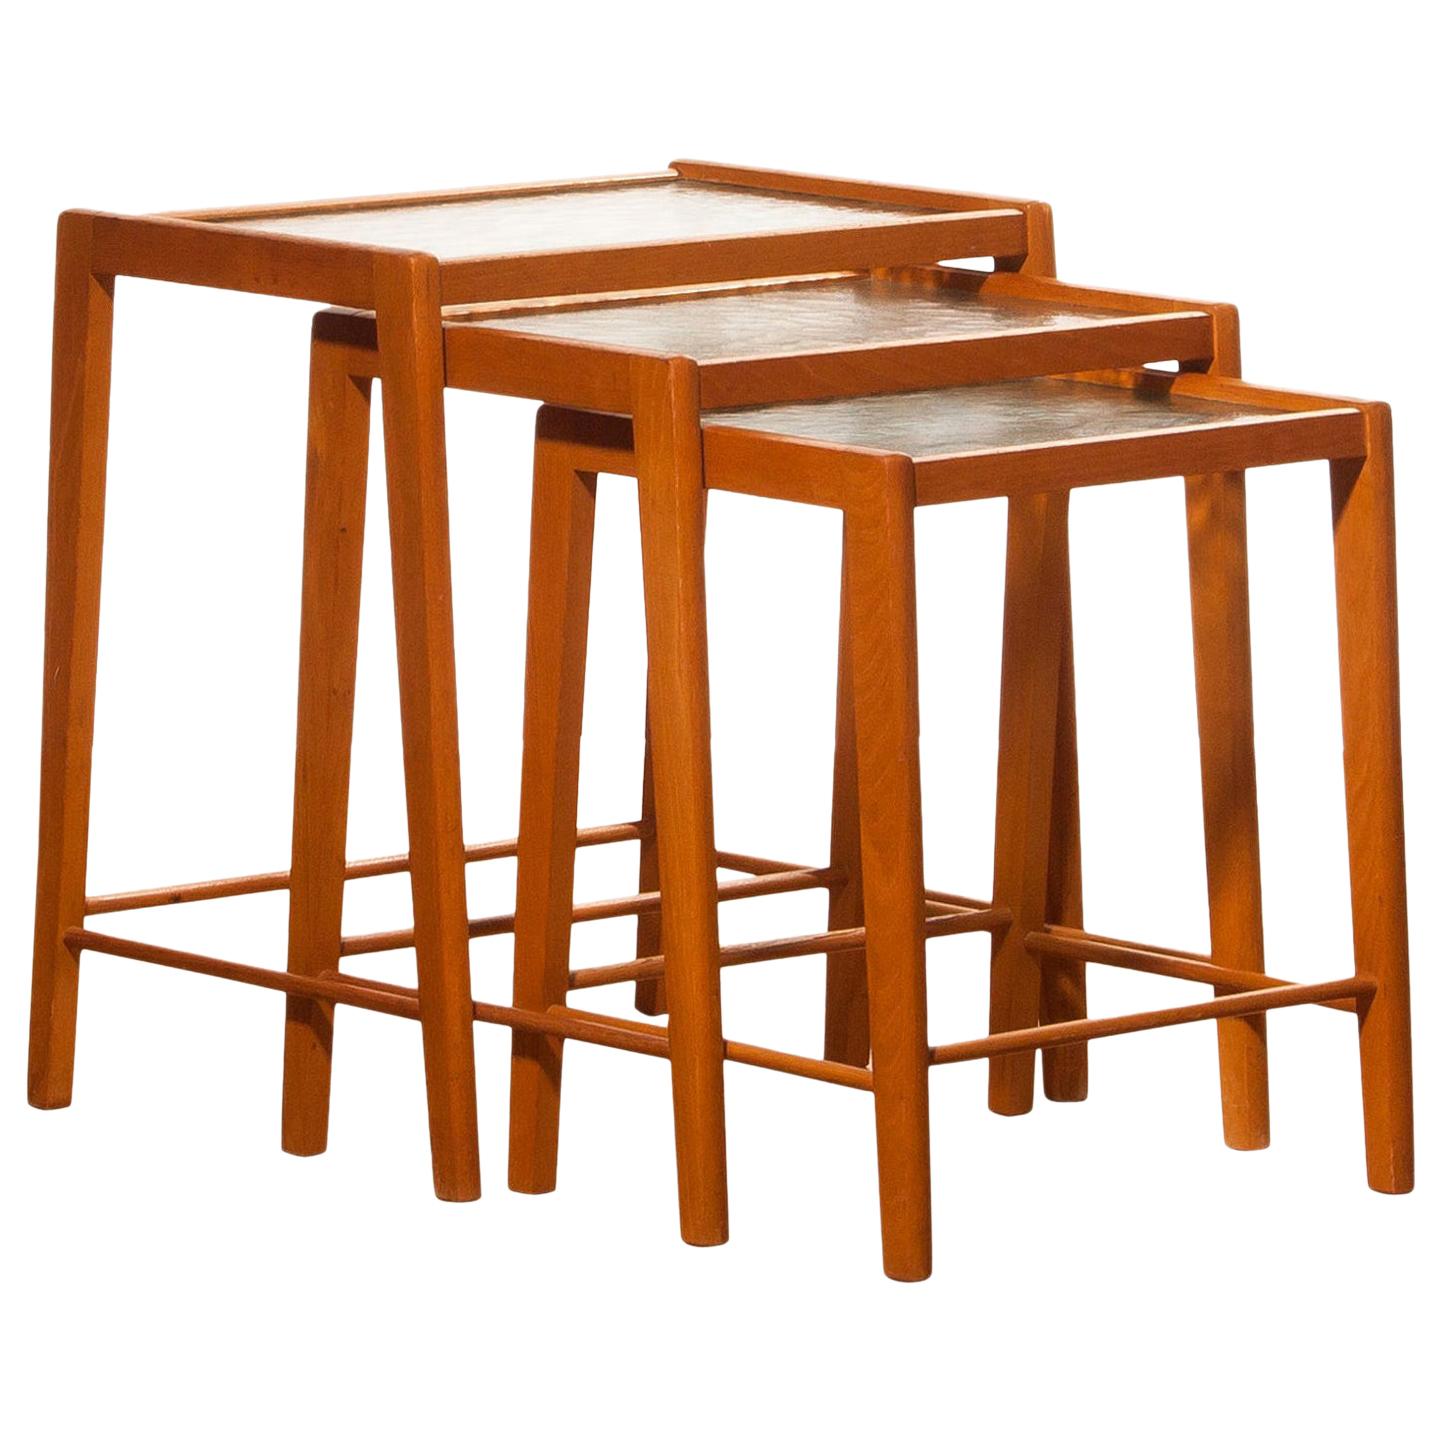 1960s, Set of Three Oak and Glass Nesting Tables, Sweden 1